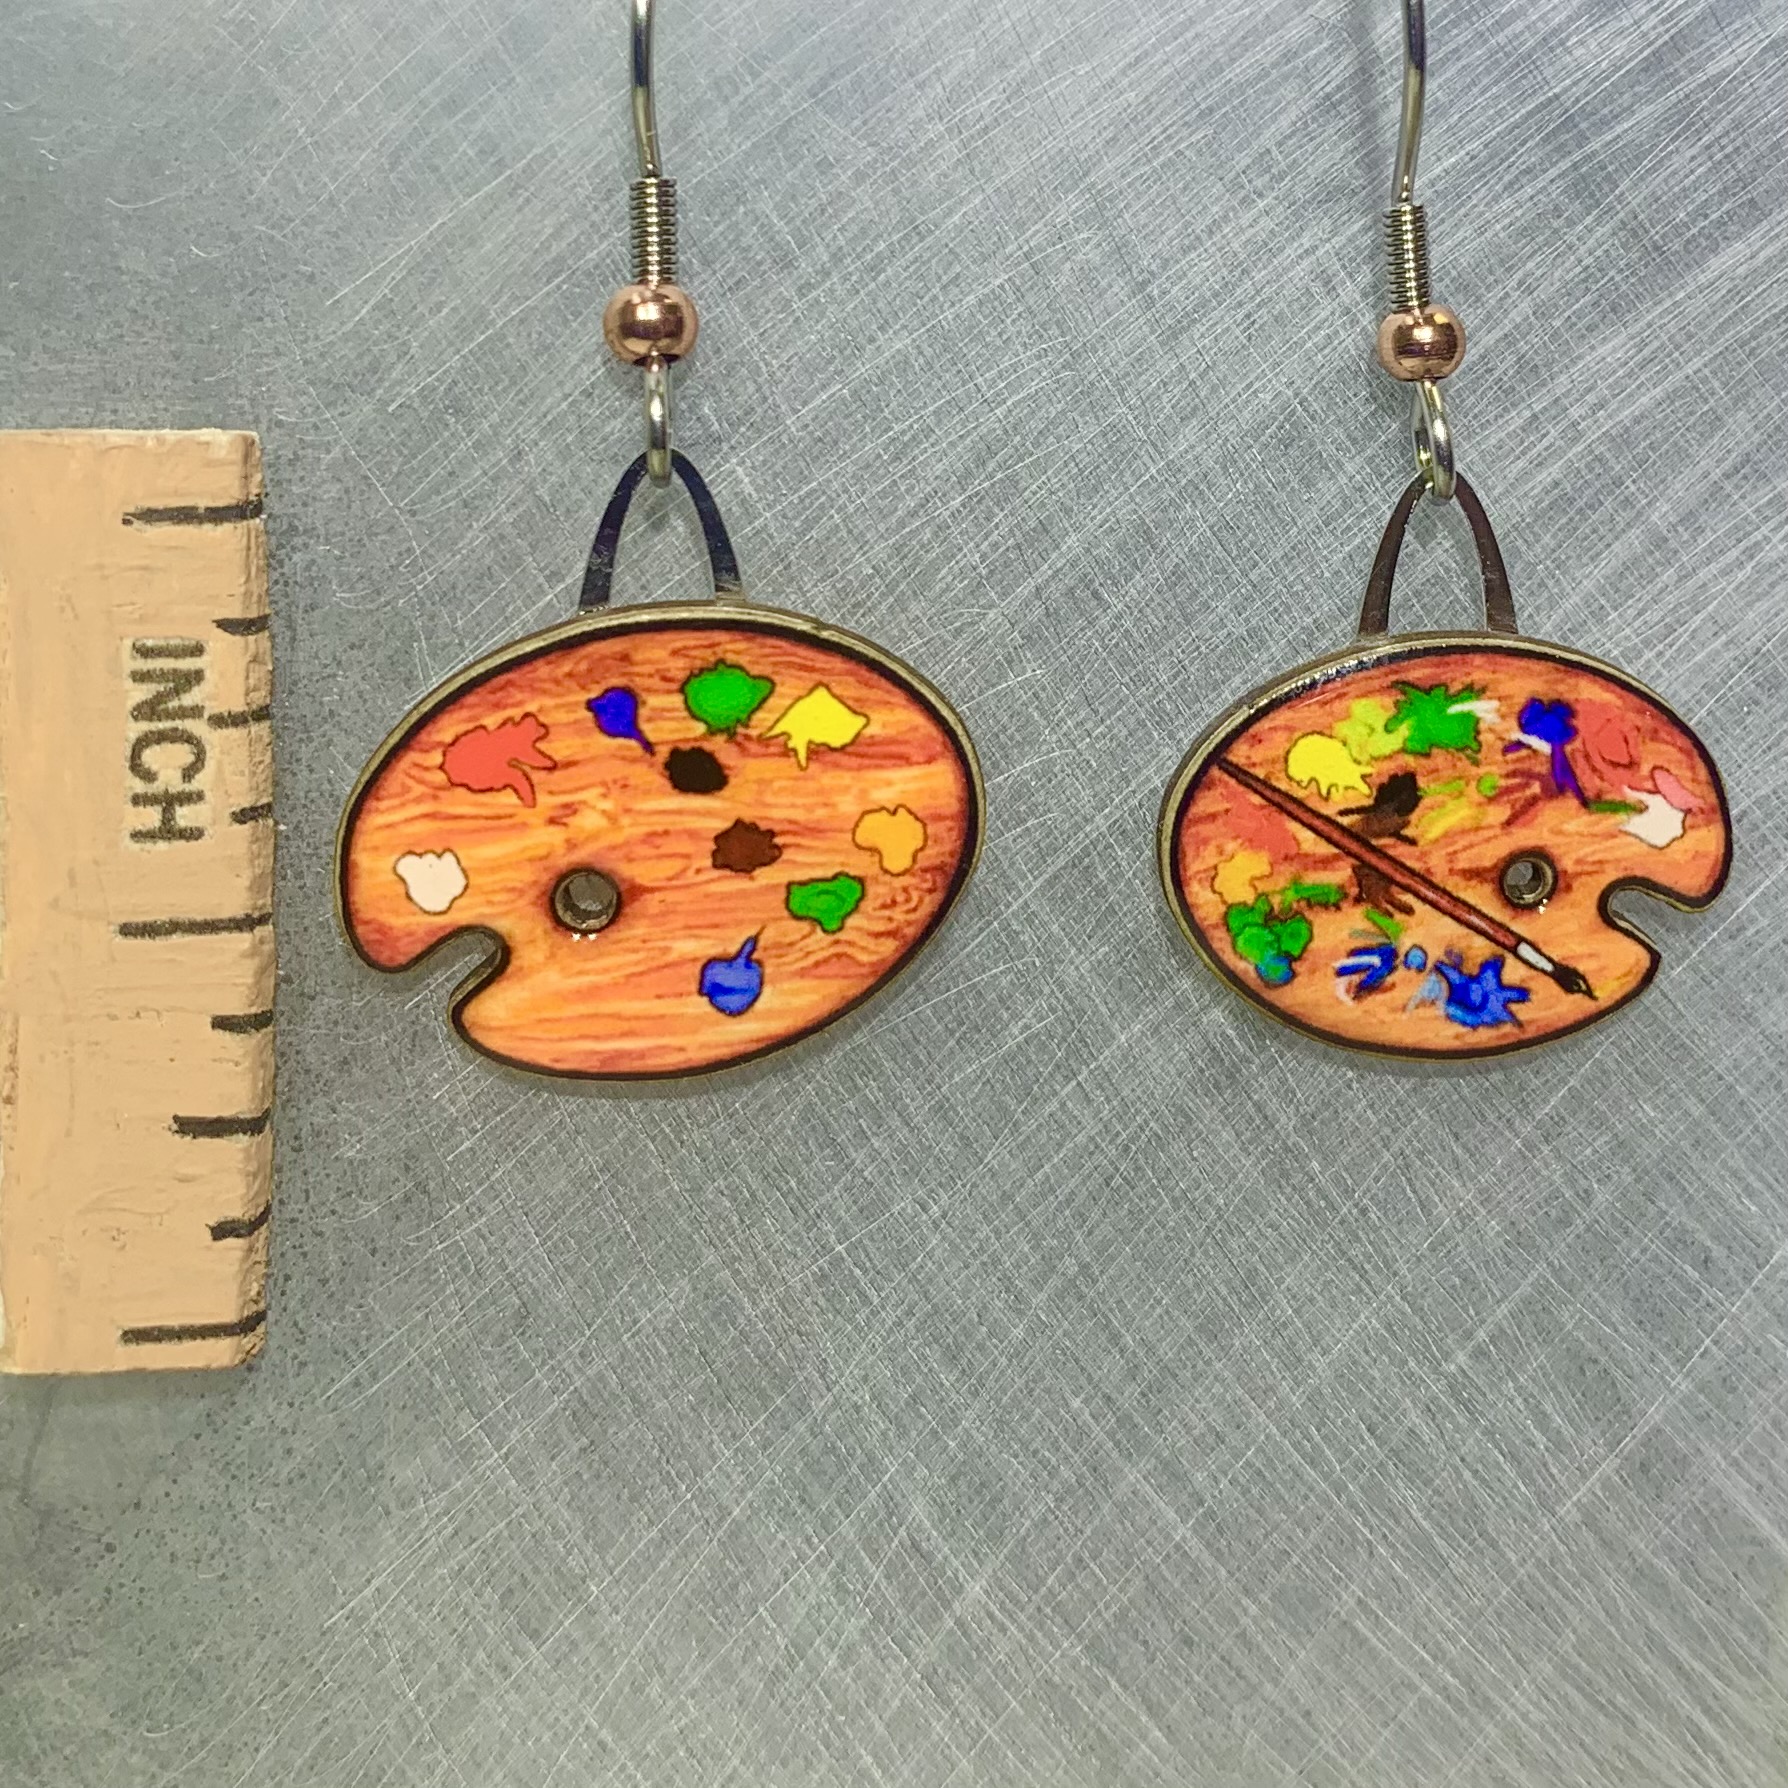 Picture shown is of 1 inch tall pair of earrings of an Art Palette.